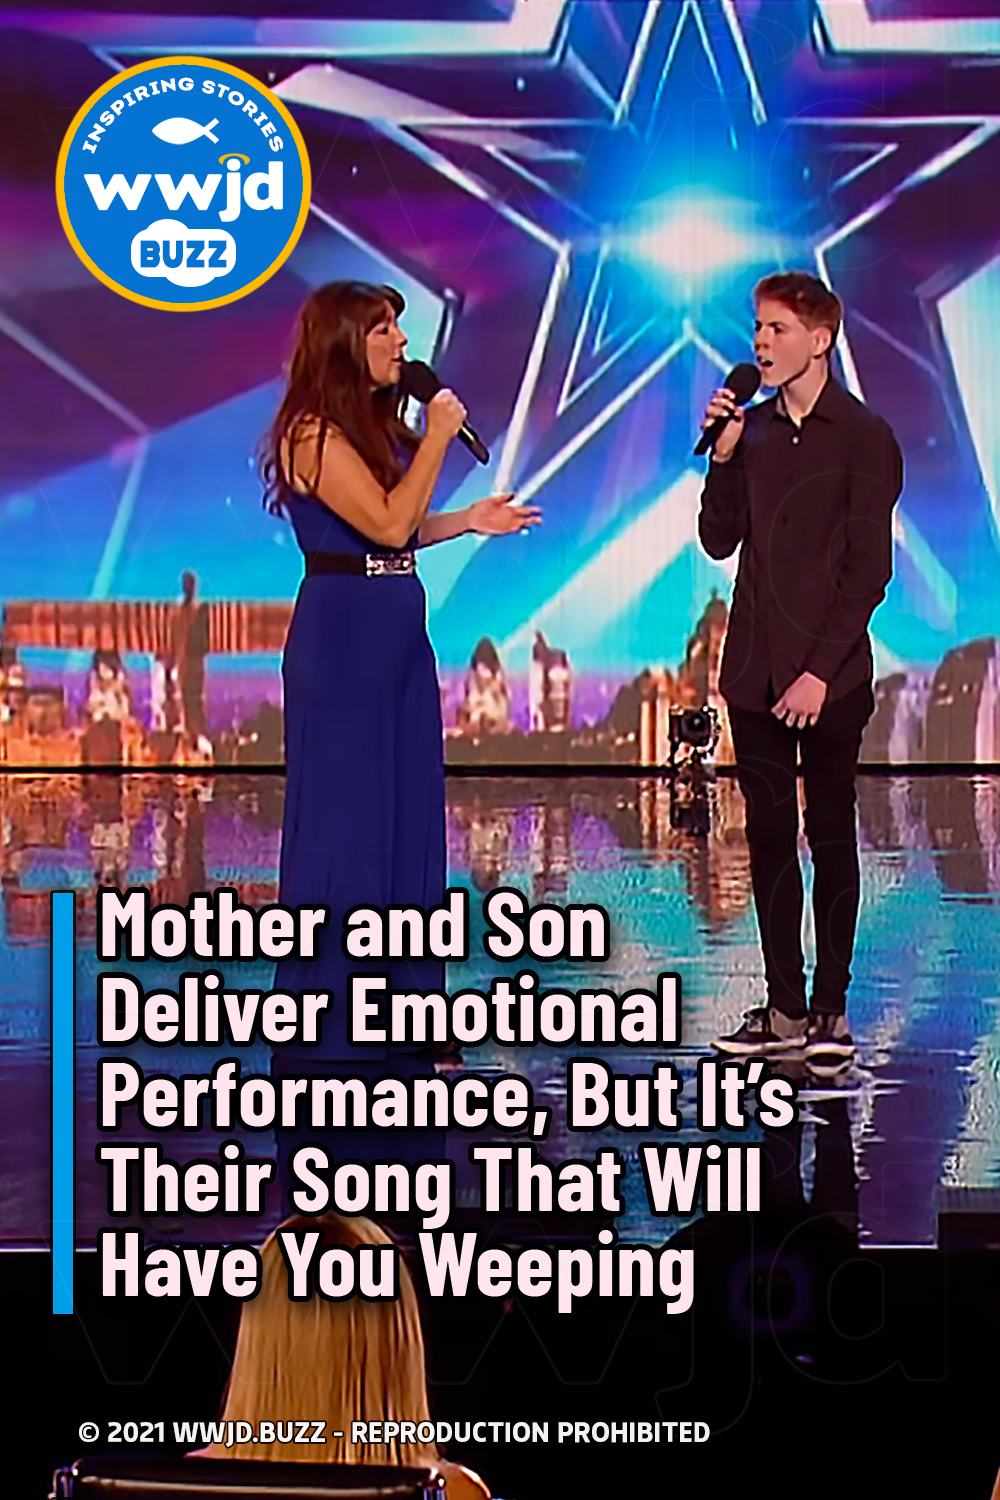 Mother and Son Deliver Emotional Performance, But It’s Their Song That Will Have You Weeping